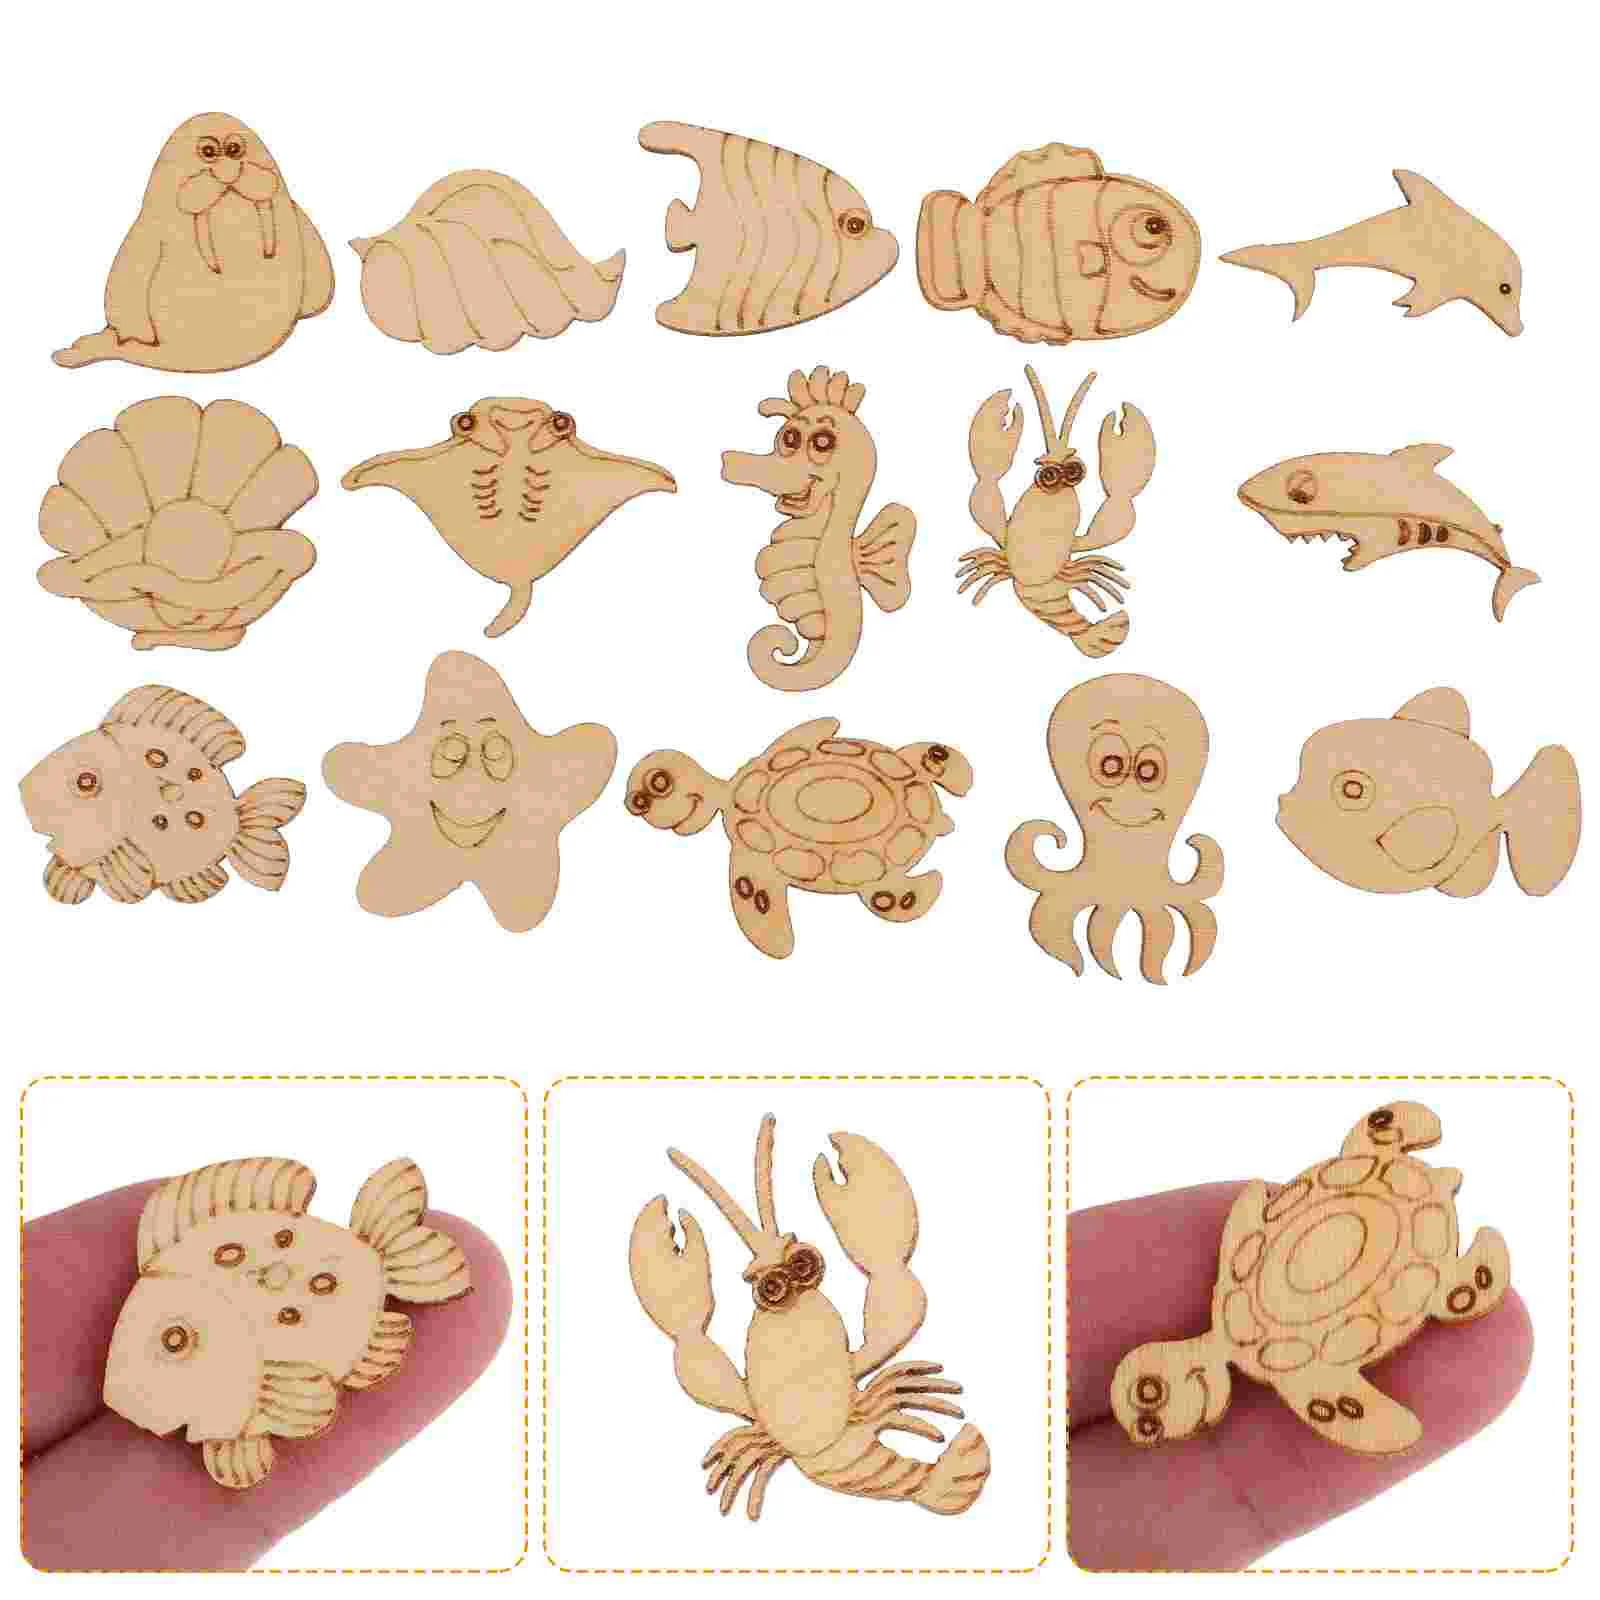 

Wood Wooden Animal Pieces Cutouts Crafts Unfinished Cutout Diy Blank Tags Slices Oceansea Fish Ornamentspainting Craft Natural